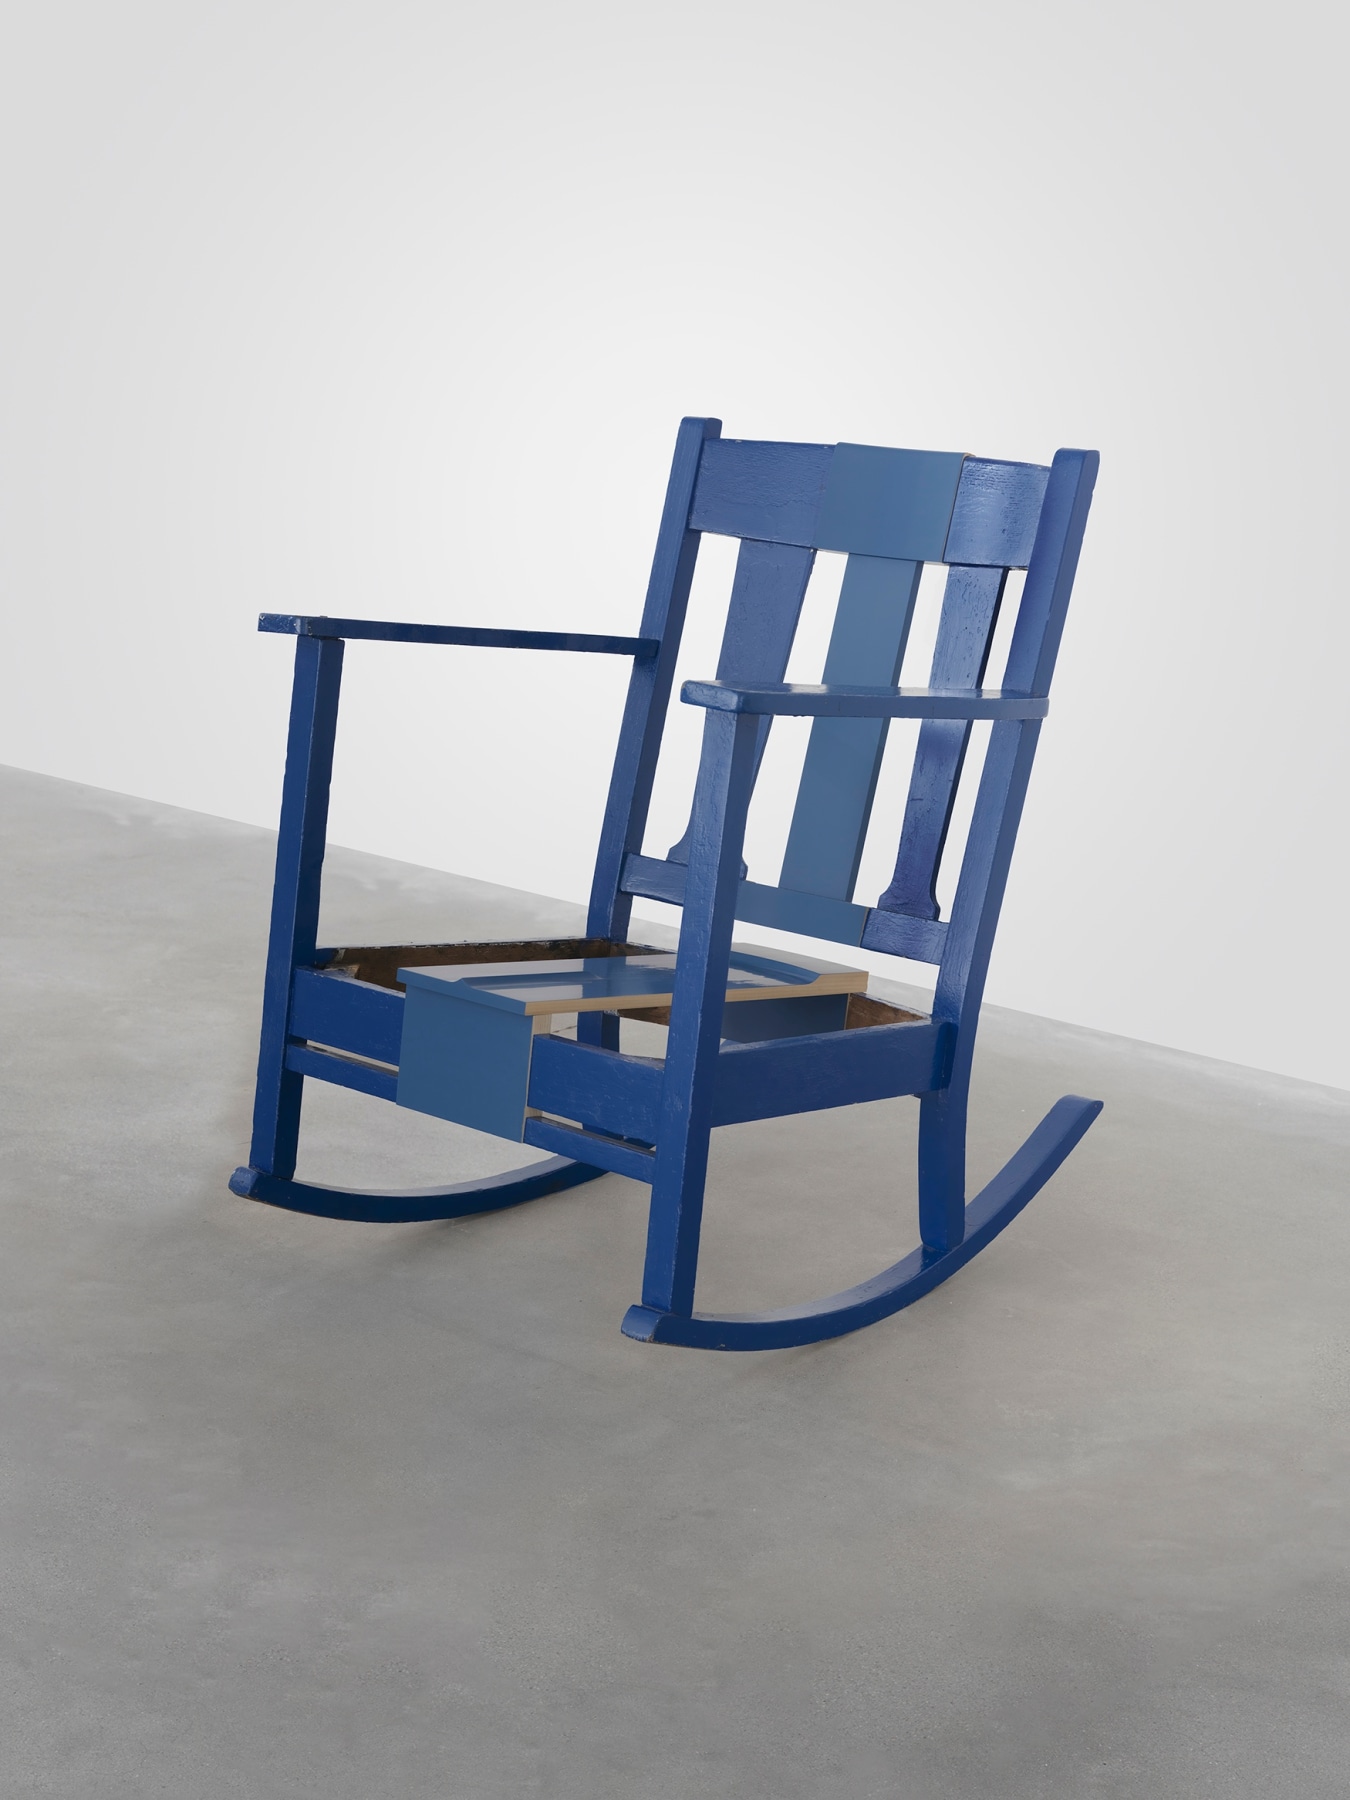 A Rocking Chair (that never had a seat) I Painted Blue When I Was Sixteen, 2011, Enamel on found chair